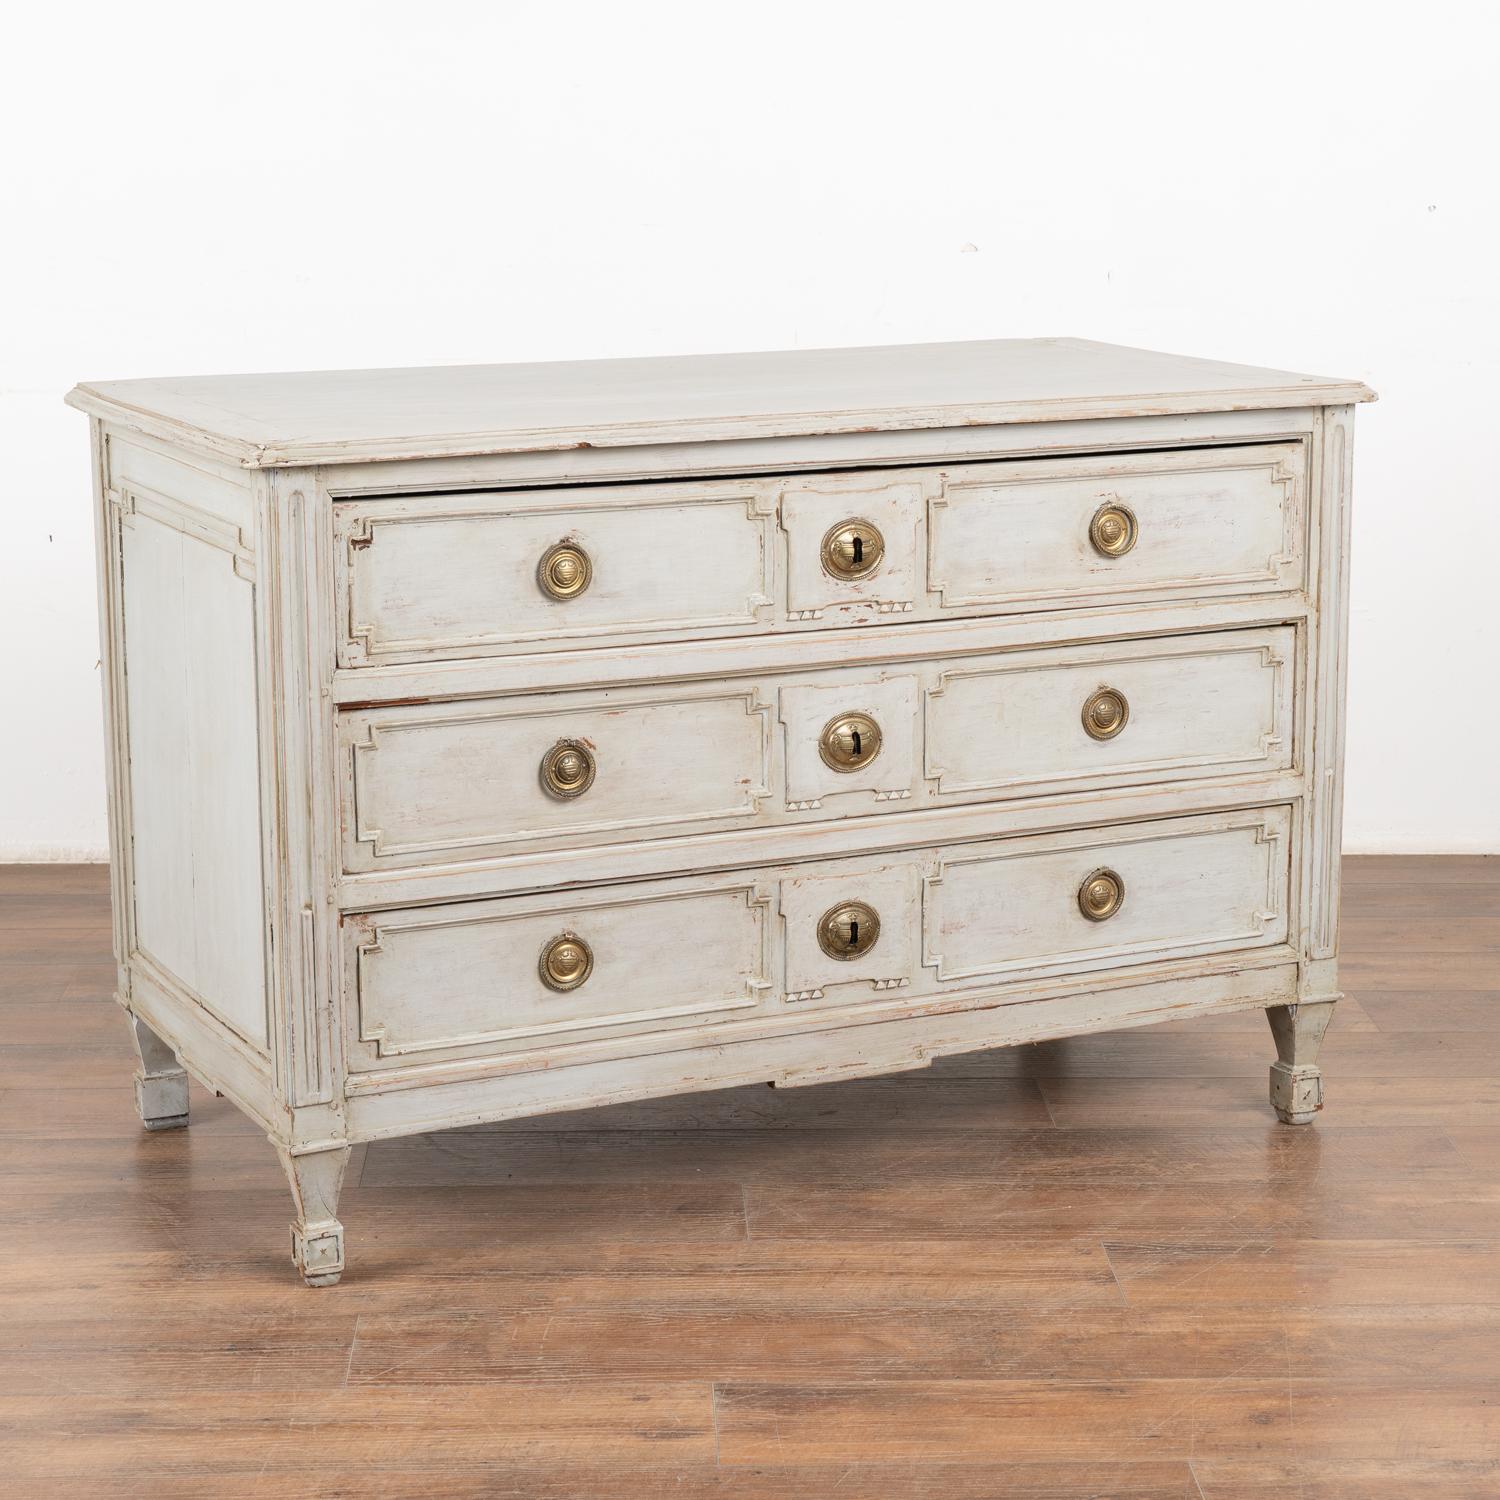 Large pine chest of three drawers with carved panels from France, circa 1820-40.
The newer, professionally applied soft gray painted finish (with pale blue undertones) adds a touch of life and interest while the carved panel drawers and tapered feet